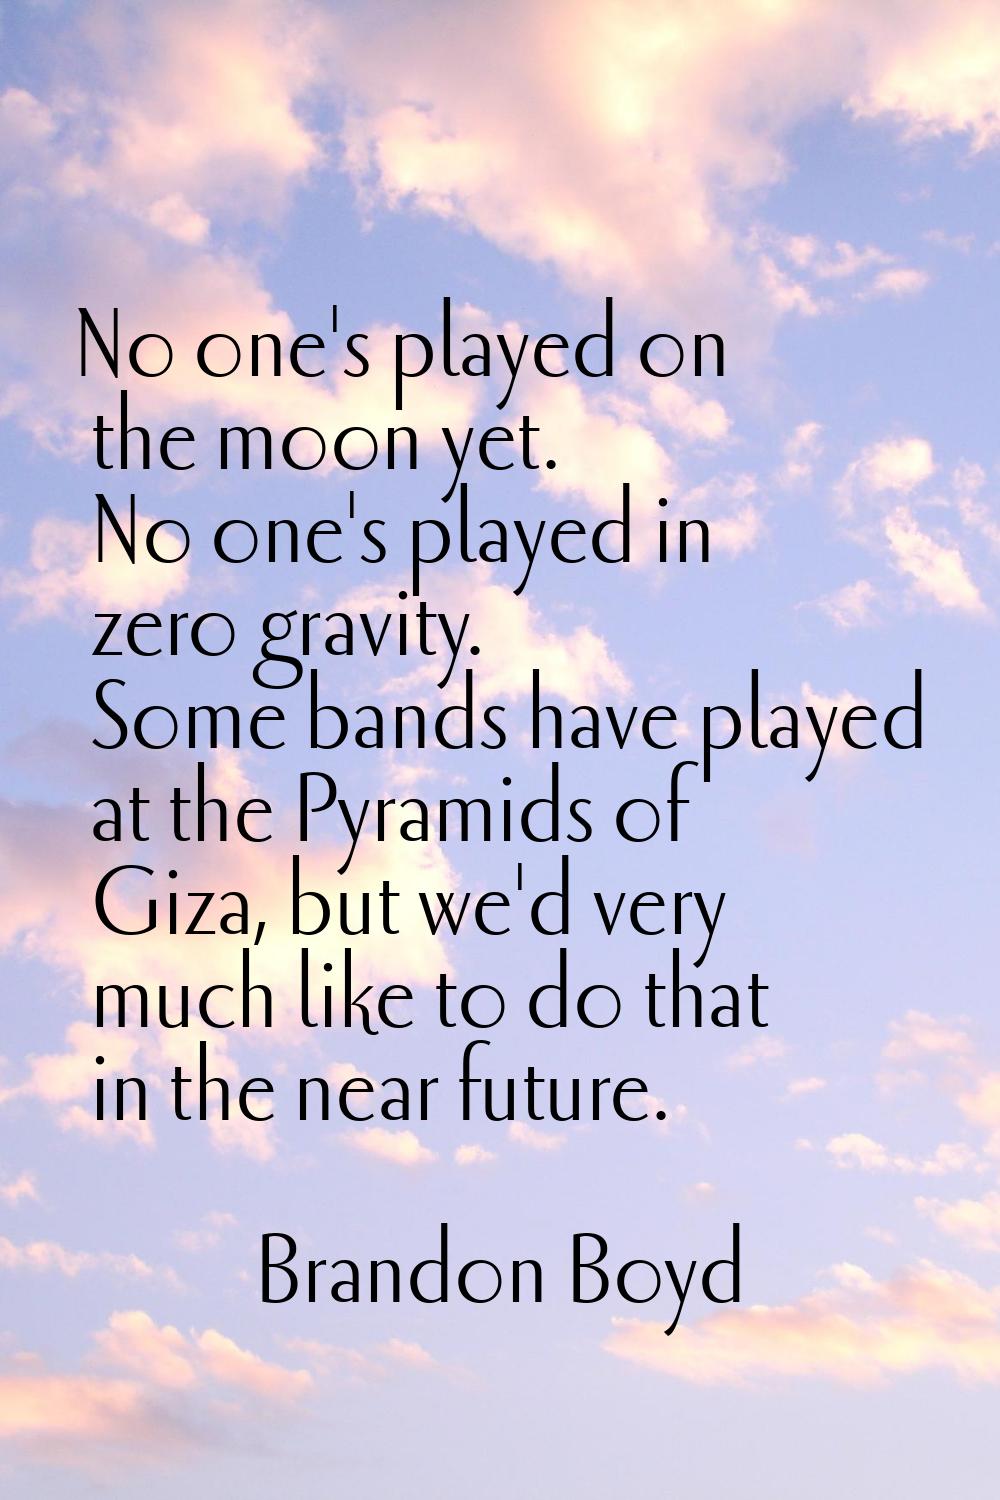 No one's played on the moon yet. No one's played in zero gravity. Some bands have played at the Pyr